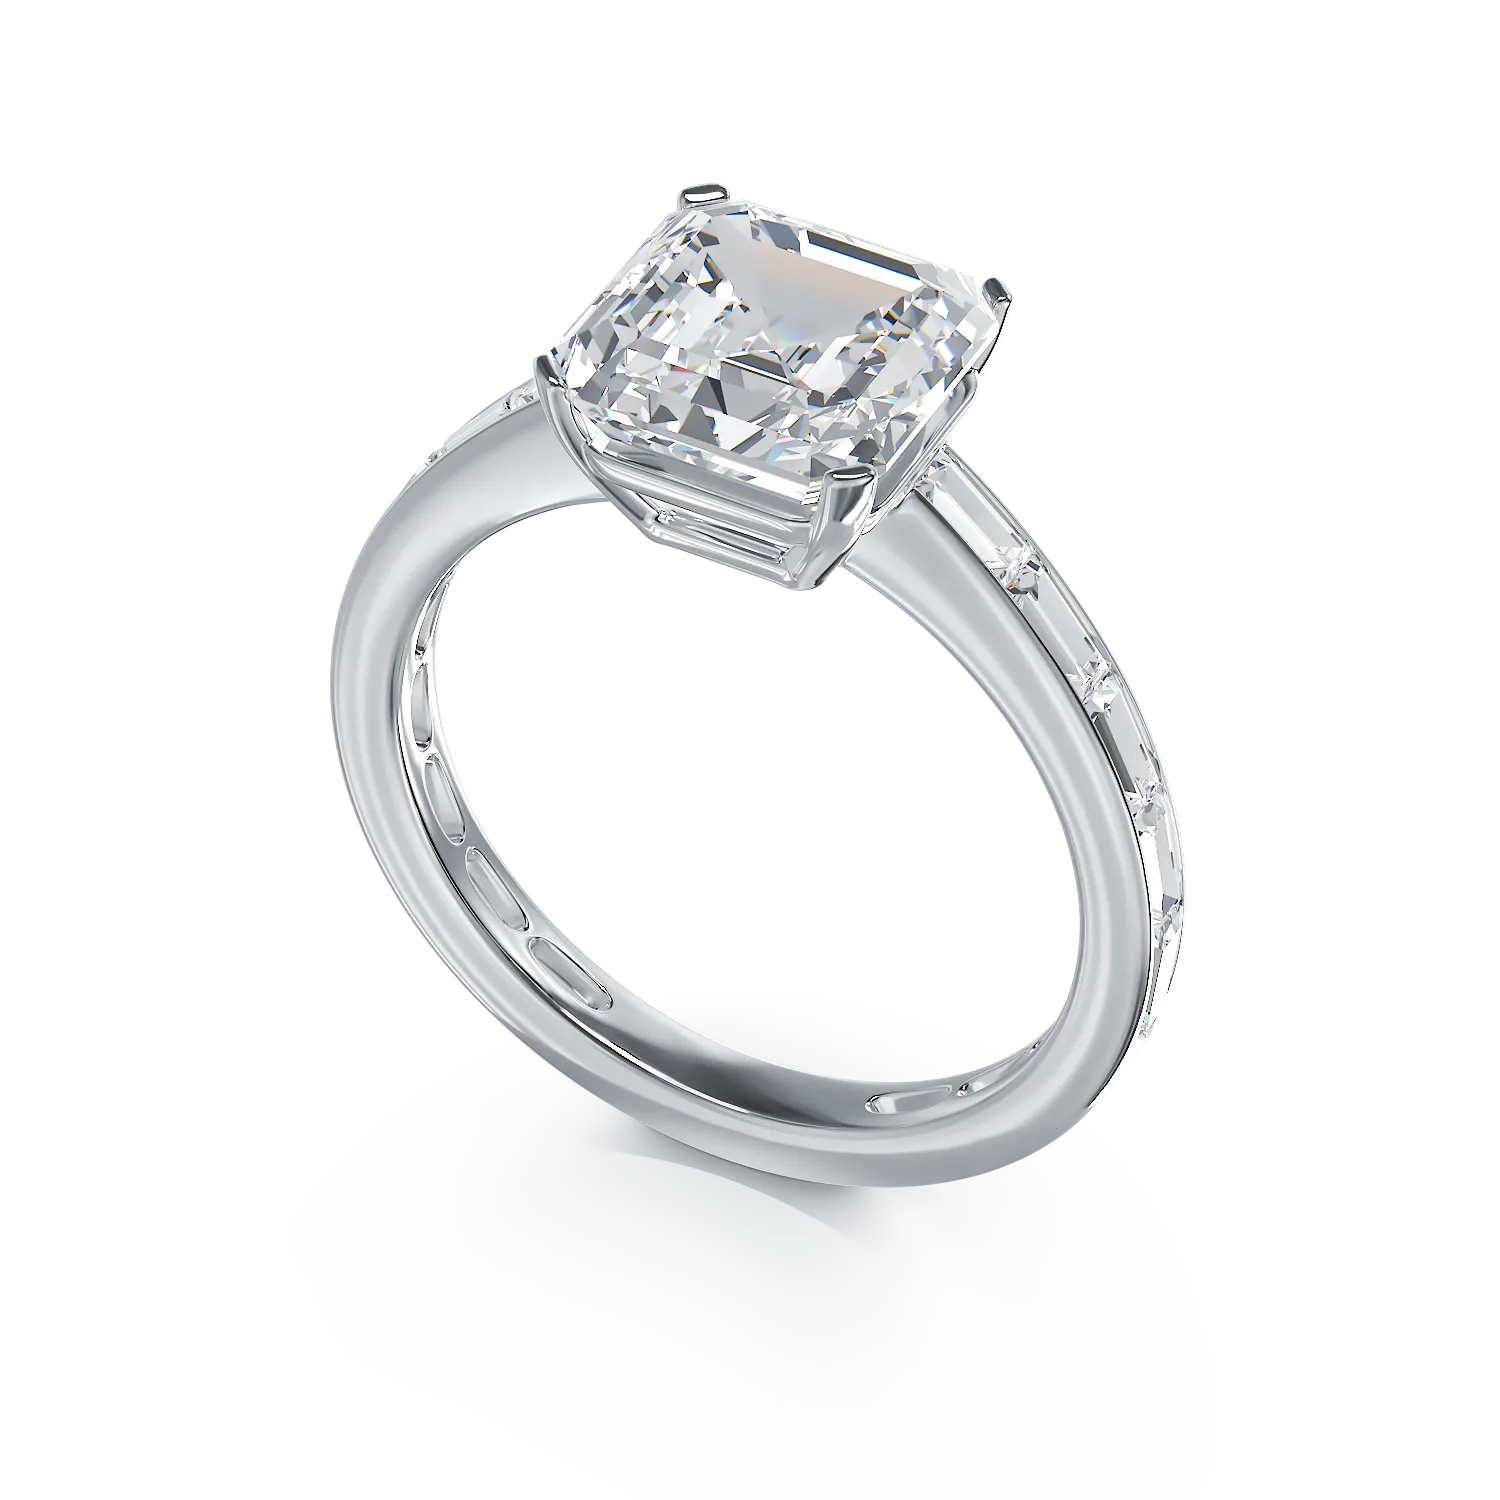 White gold engagement ring with 3.01ct diamond and 0.96ct diamonds